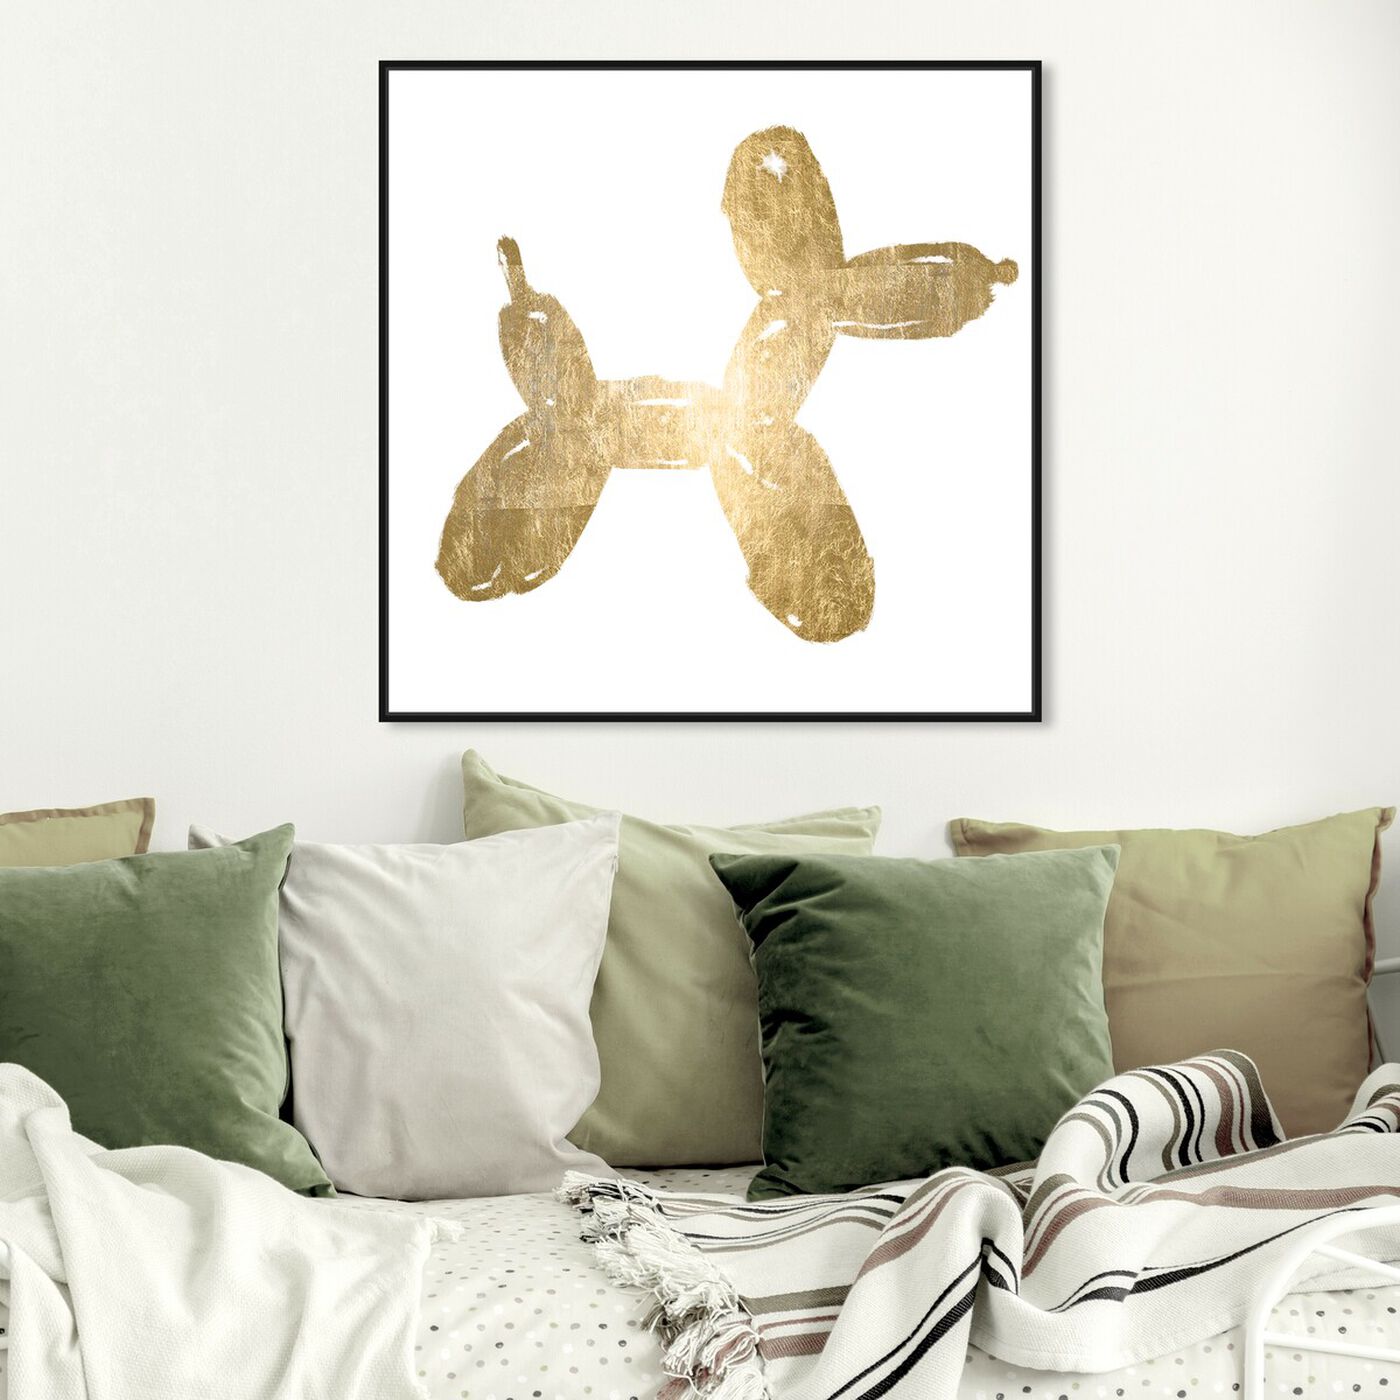 Hanging view of Balloon Dog Photocopy Gold Foil featuring fashion and glam and lifestyle art.